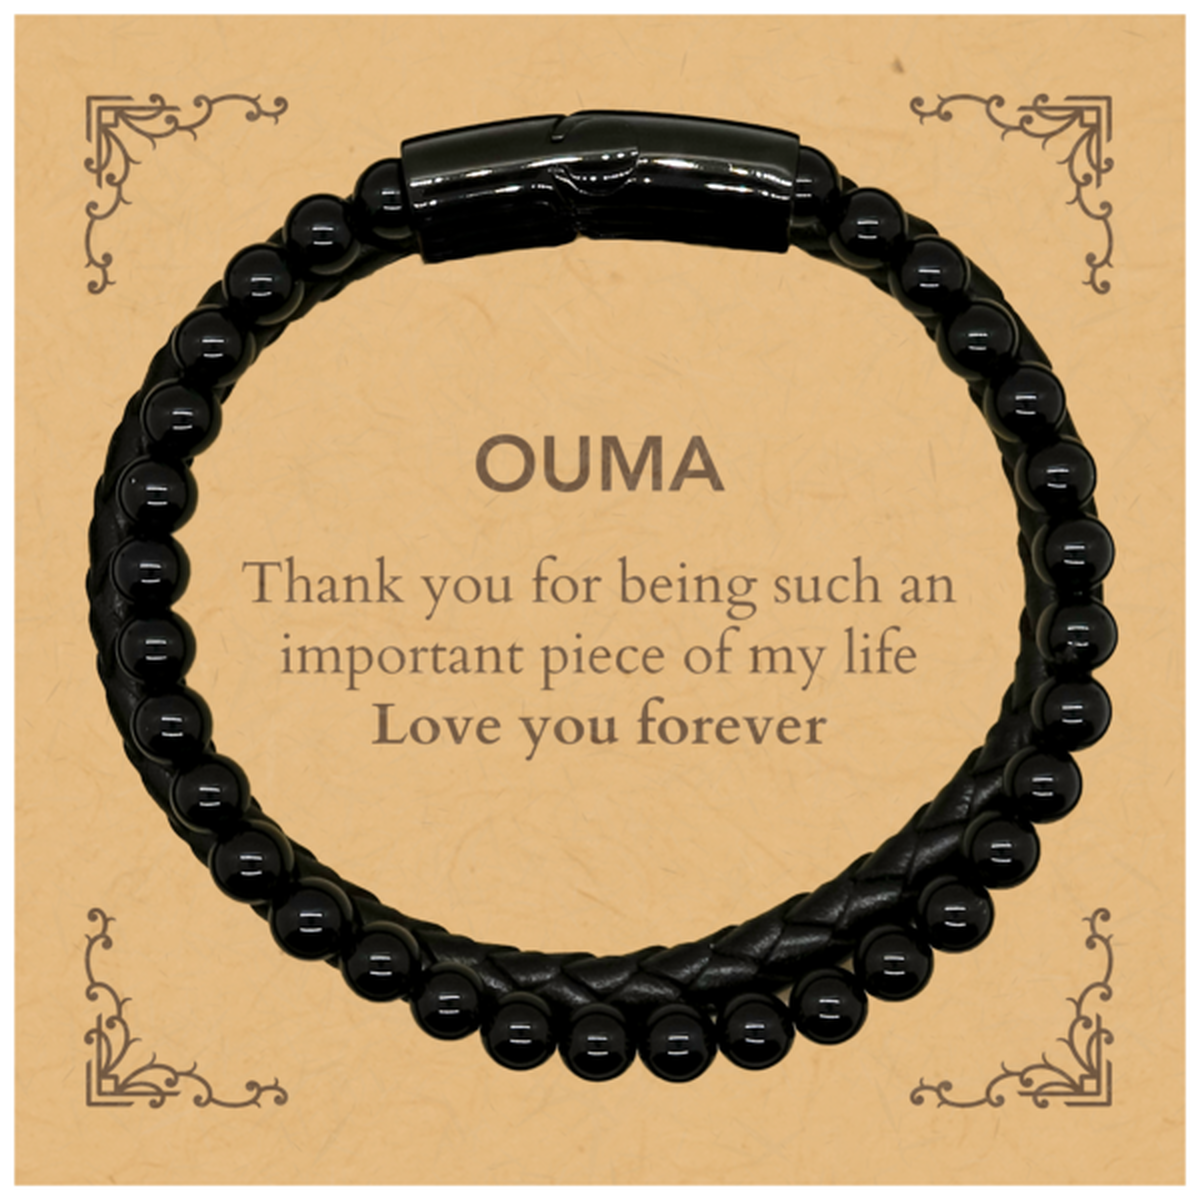 Appropriate Ouma Stone Leather Bracelets Epic Birthday Gifts for Ouma Thank you for being such an important piece of my life Ouma Christmas Mothers Fathers Day